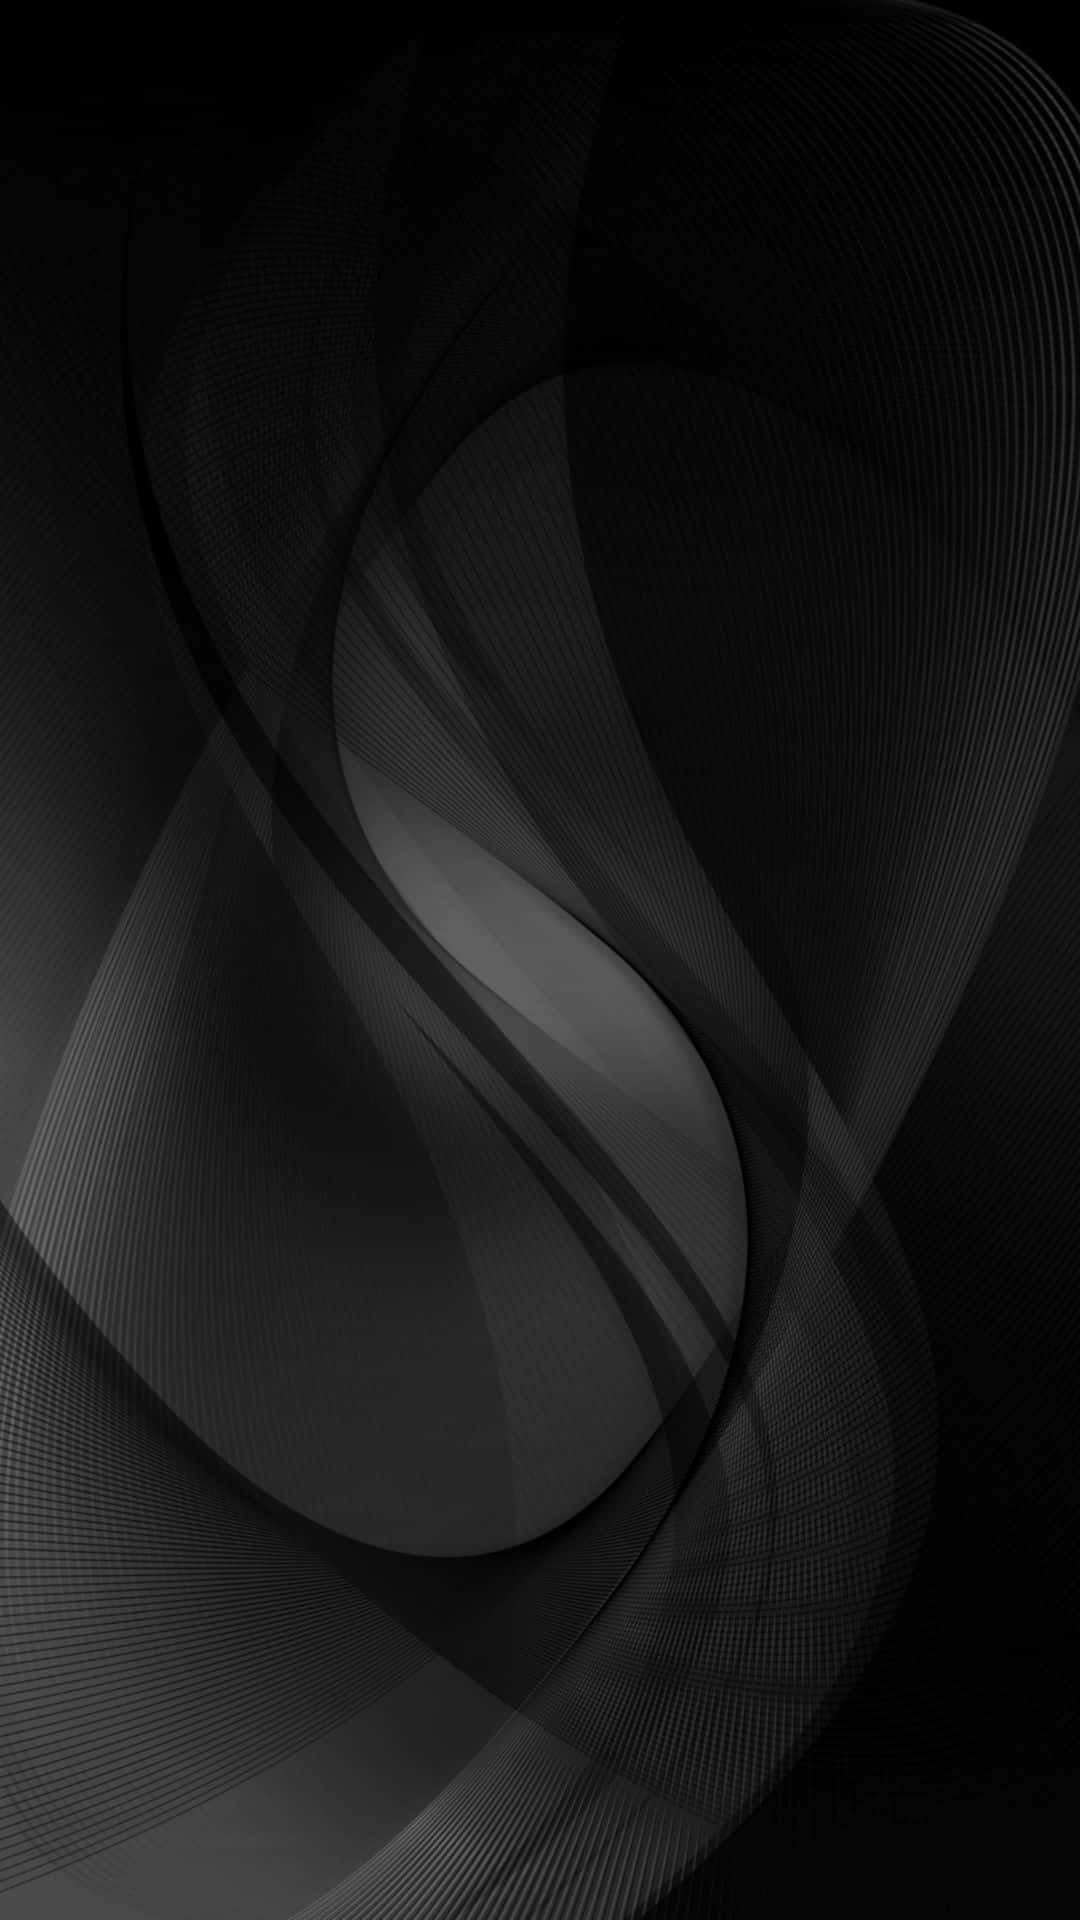 Abstract Waves Design Black Background